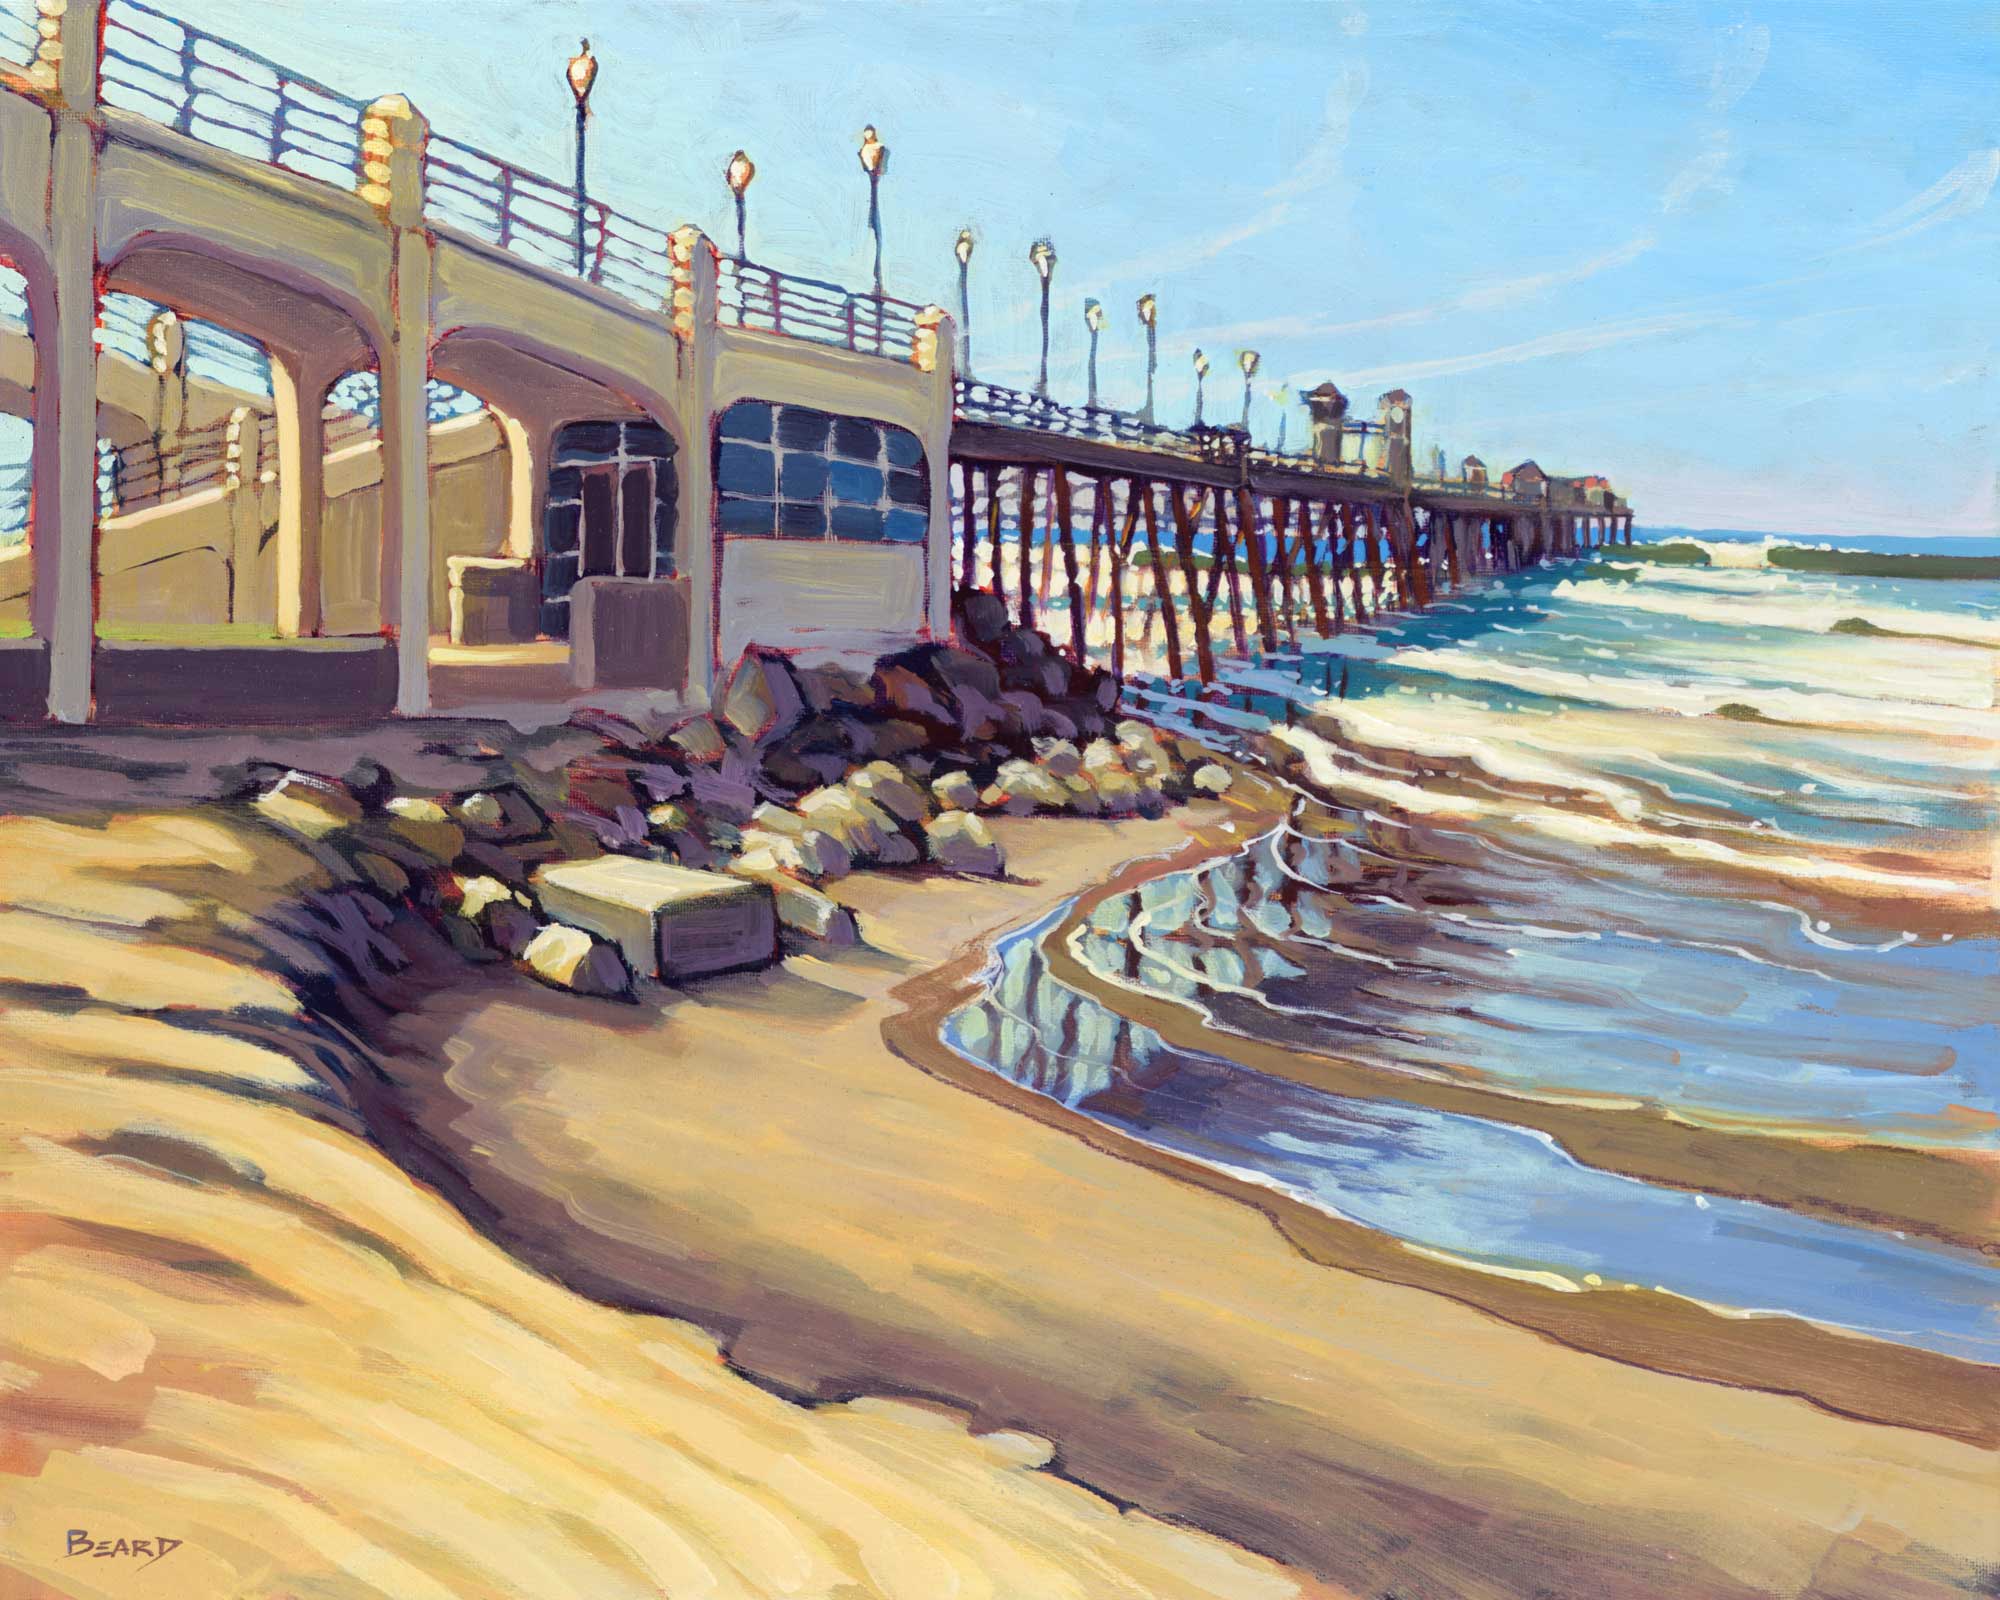 Plein air artwork from Oceanside Pier on the San Diego coast of southern California